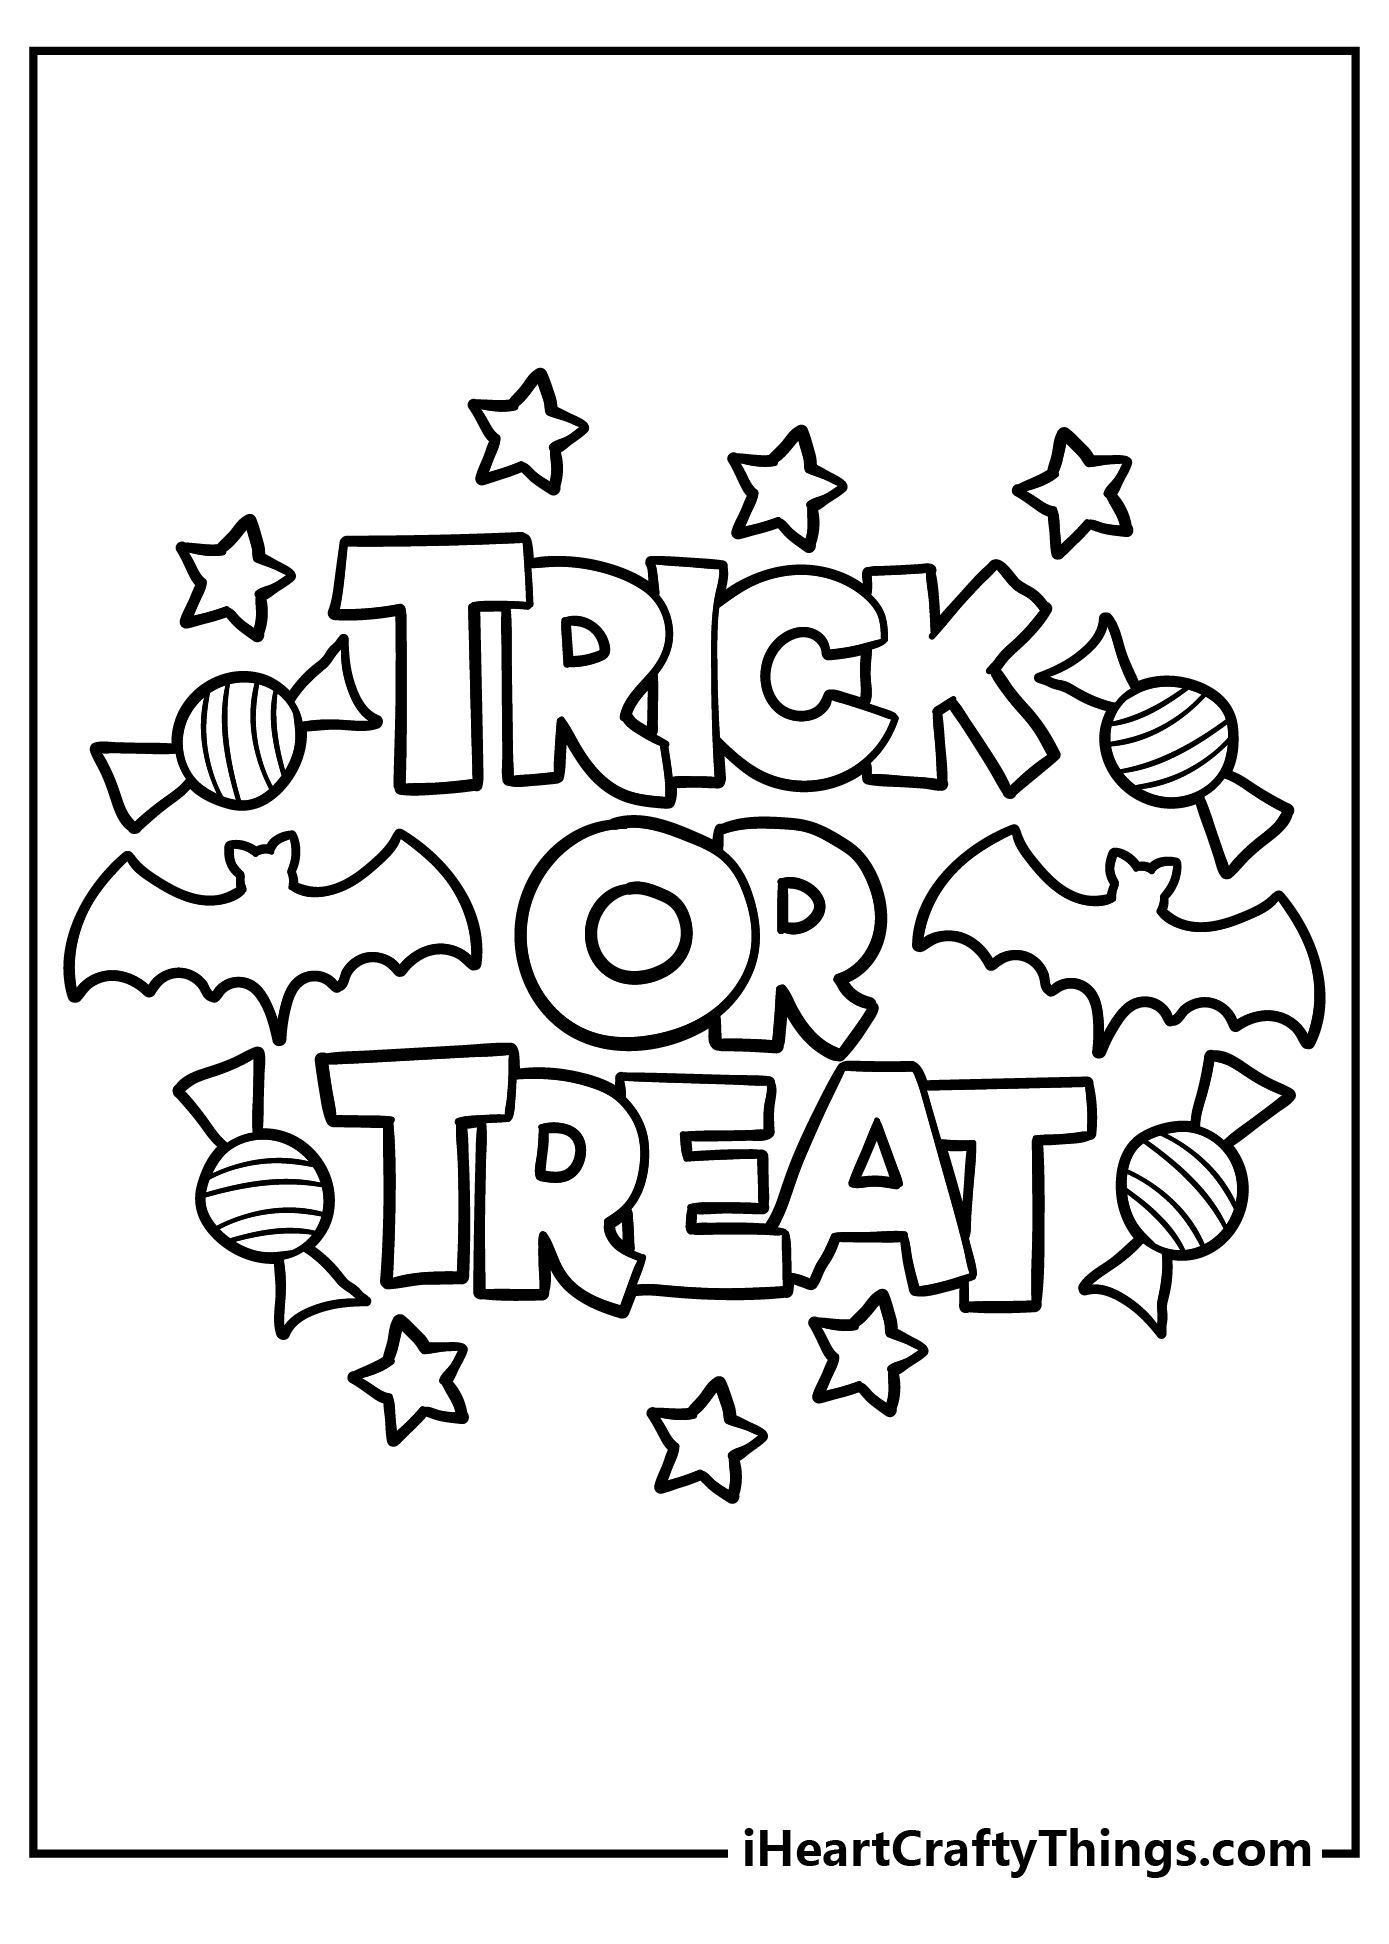 Trick Or Treat Coloring Pages for kids free download